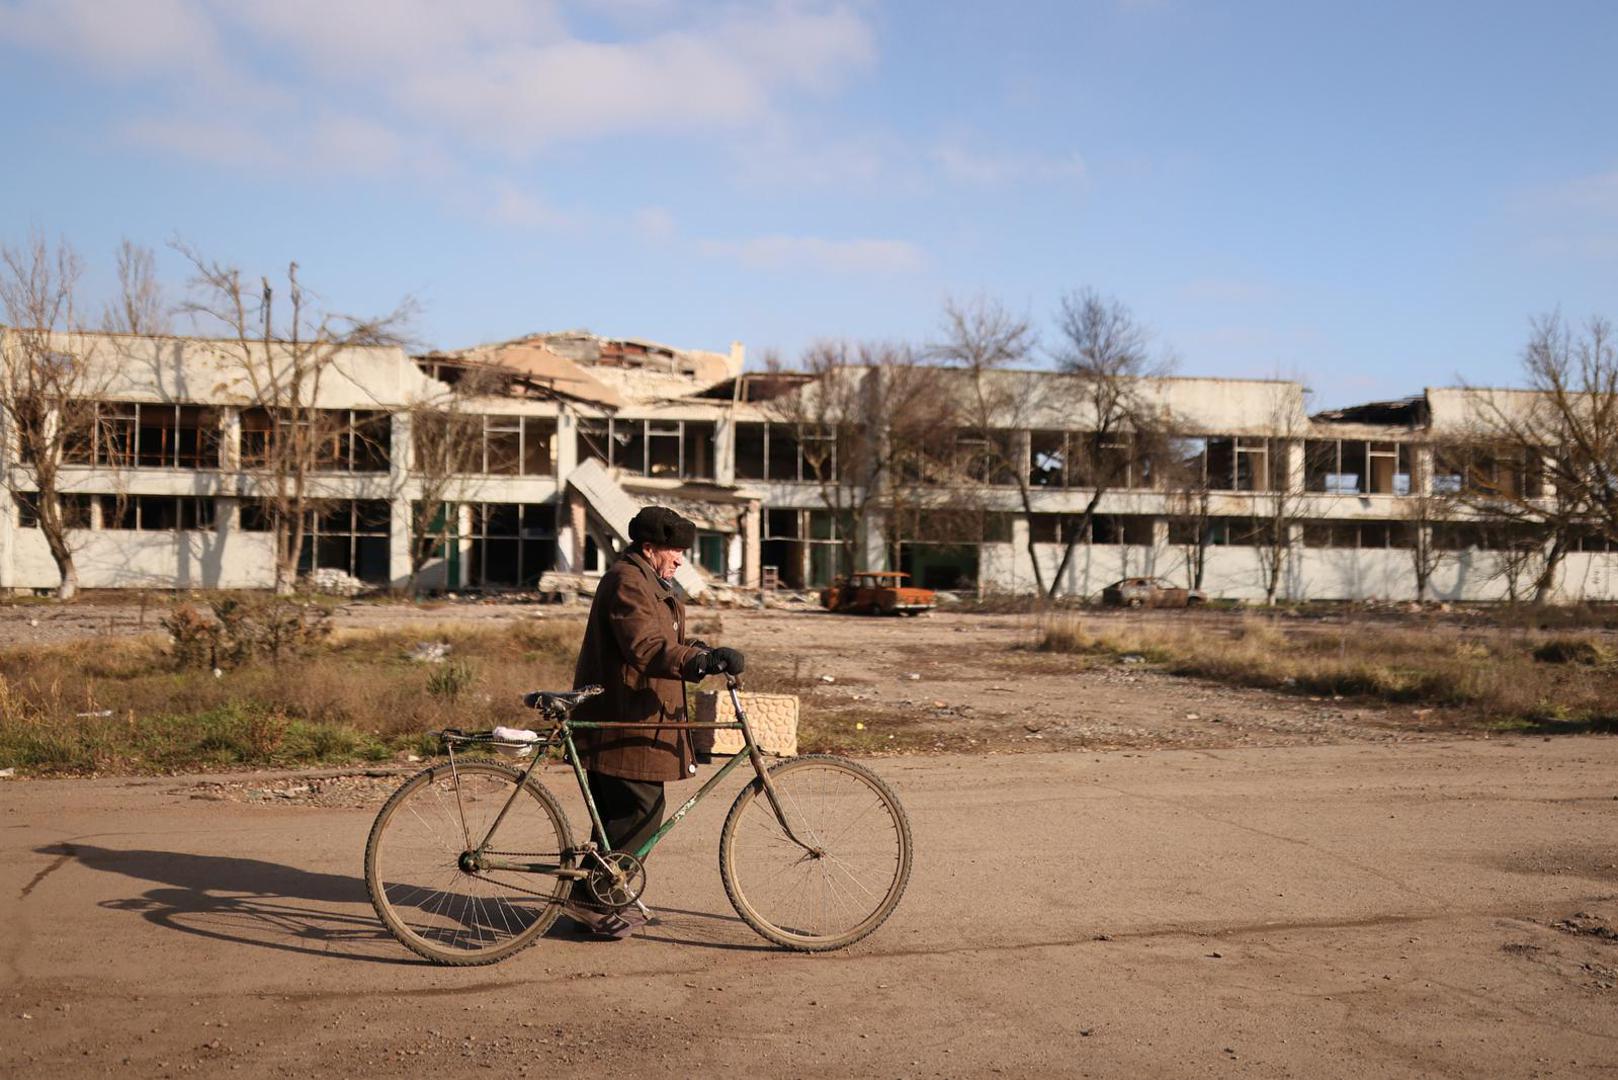 Volodymyr Kovalyov, 77, who remained in his village throughout the conflict and was in his house in October when it was hit by what he thinks was a tank shell, walks with his bicycle to a food delivery point, amid Russia's invasion of Ukraine, in the village of Posad-Pokrovske, northwest of the city of Kherson, Ukraine January 26, 2023. Russian troops reached Posad-Pokrovske on Feb. 25 last year, the day after Russia launched the full-scale invasion it calls a "special military operation" in Ukraine. It was as far as they were able to push north, and the area around the small settlement became a no-go zone between enemy forces. The ground is now littered with ammunition boxes, bullet casings and burned out Russian tanks. Mines lay scattered, two unexploded missiles protrude from the earth nearby, deep, narrow trenches snake through fields and house after house lays in ruins.      REUTERS/Nacho Doce           SEARCH "DOCE UKRAINE VILLAGE" FOR THIS STORY. SEARCH "WIDER IMAGE" FOR ALL STORIES.      TPX IMAGES OF THE DAY Photo: NACHO DOCE/REUTERS